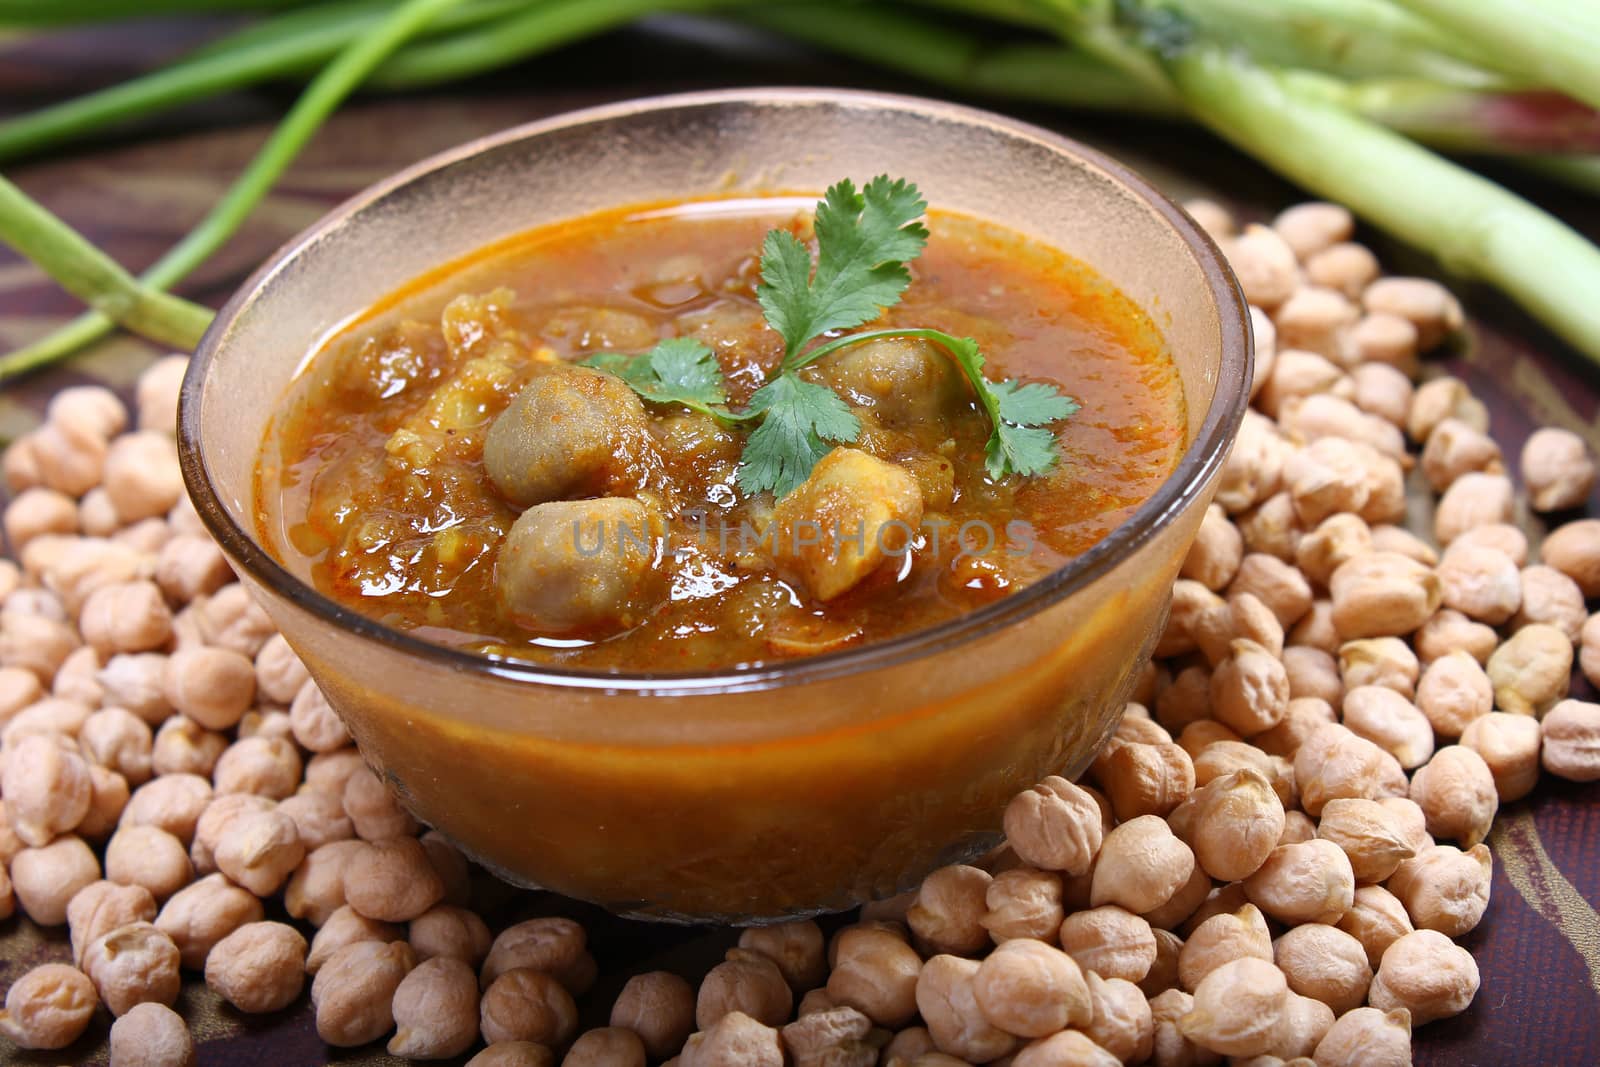 spicy chana masala, raw chickpeas around the bowl with green onion
indian dish